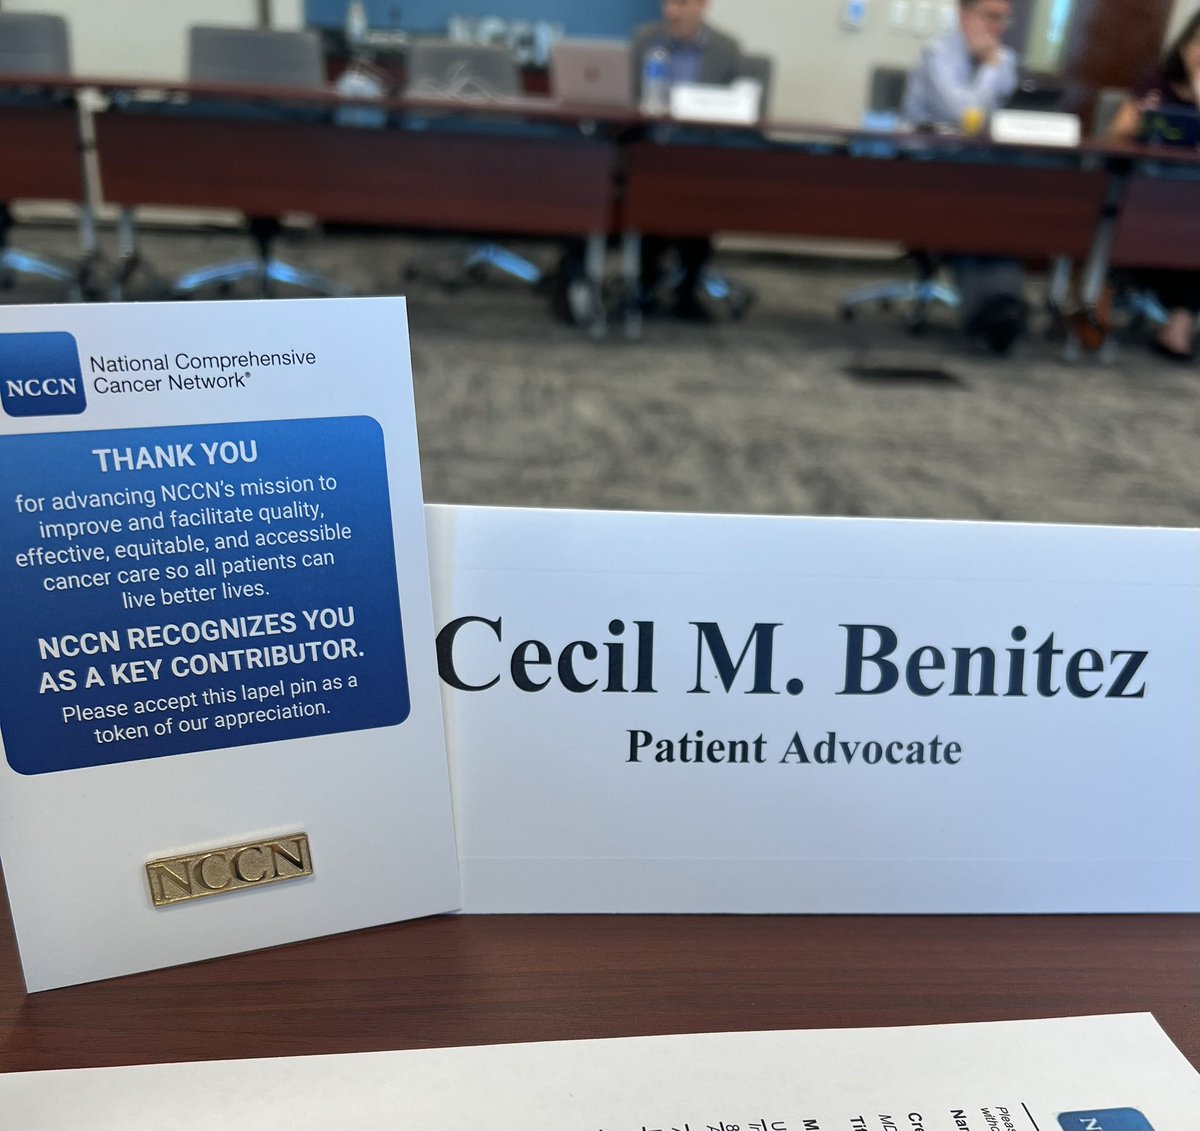 Ready to advocate for patients 💪🏽 #NCCN @UCLAradonc